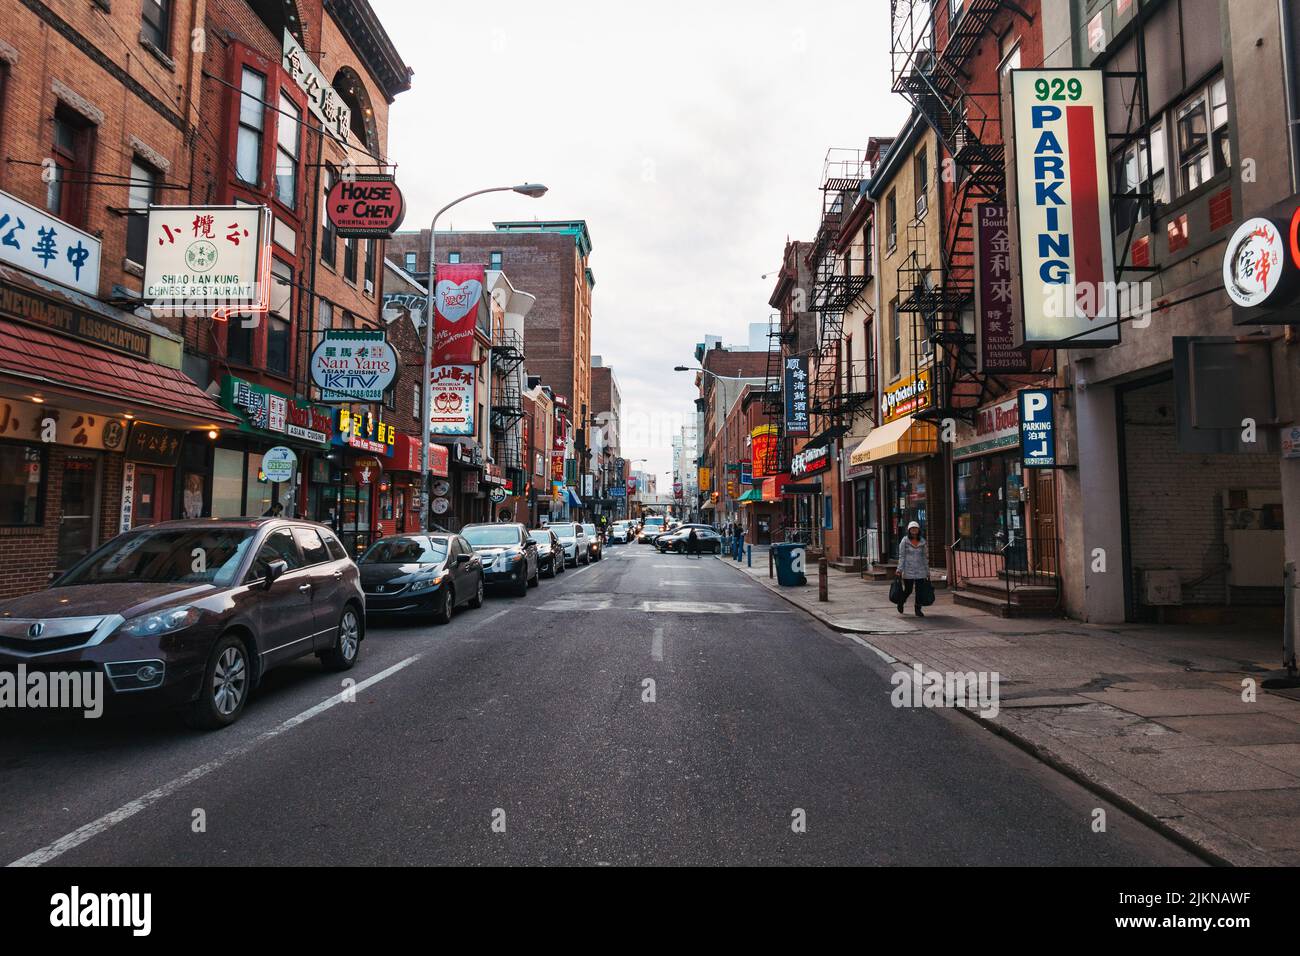 Looking down a city street in Chinatown, Philadelphia, USA Stock Photo